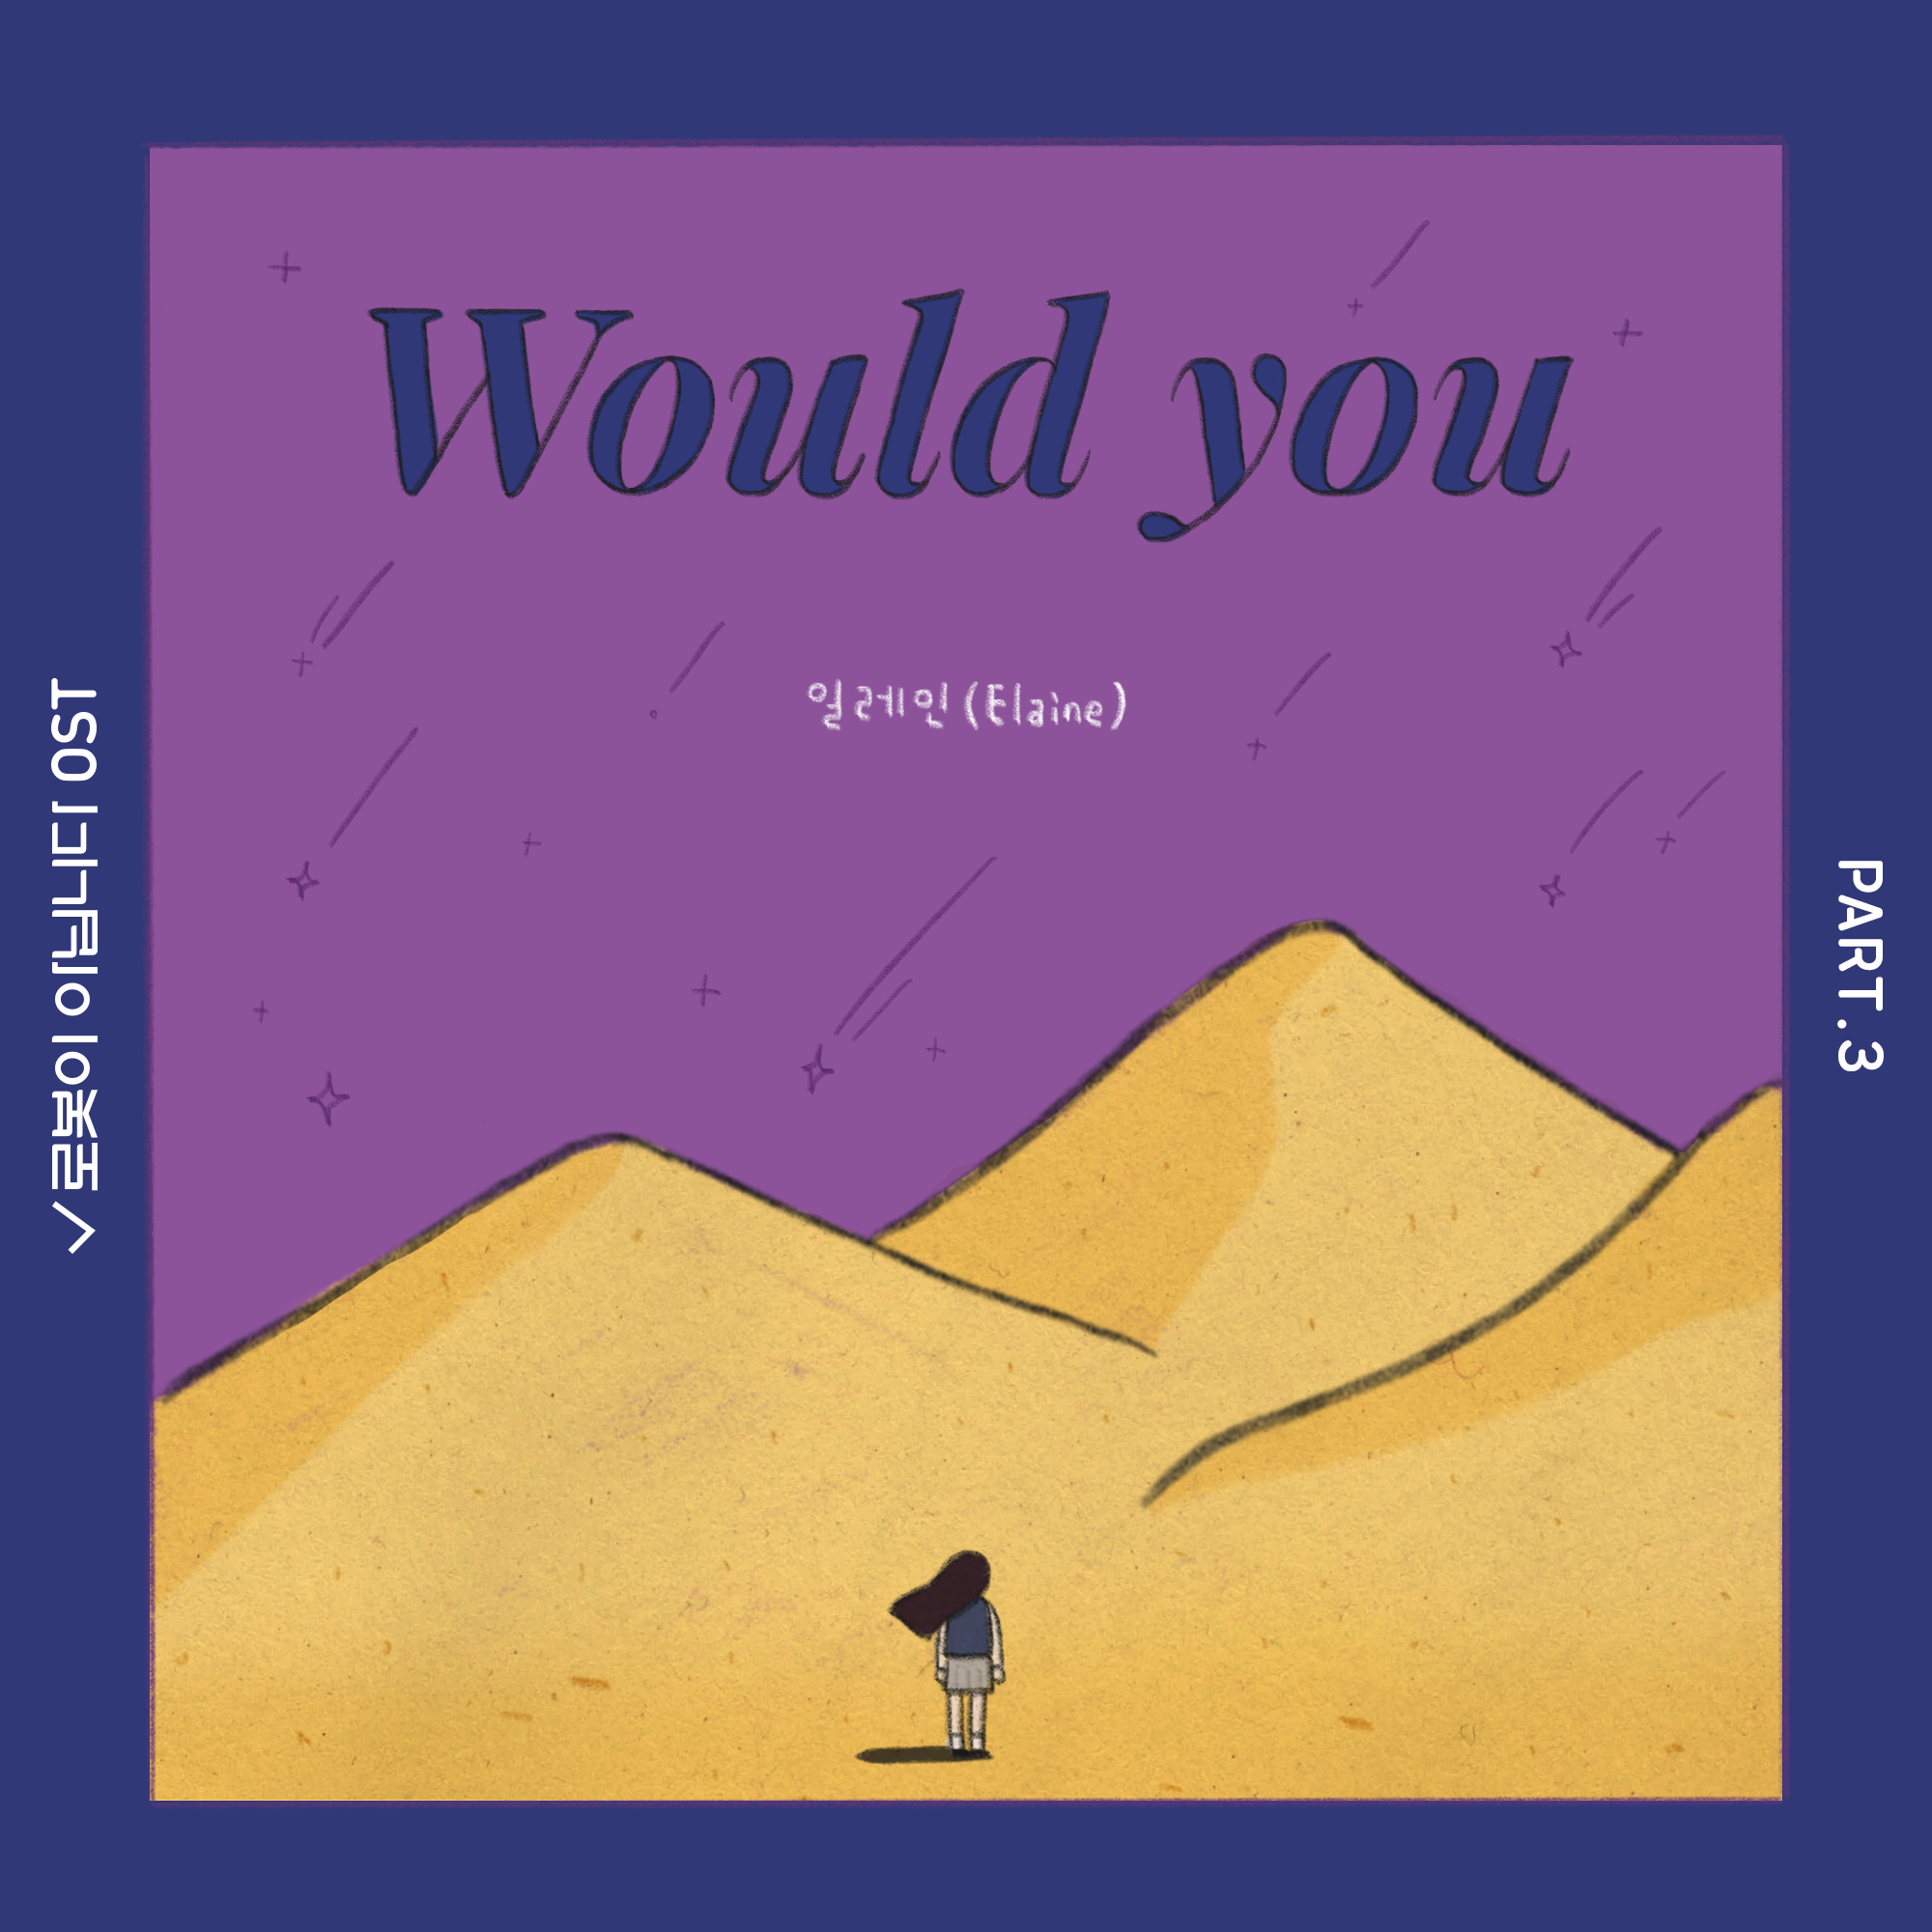 Would you